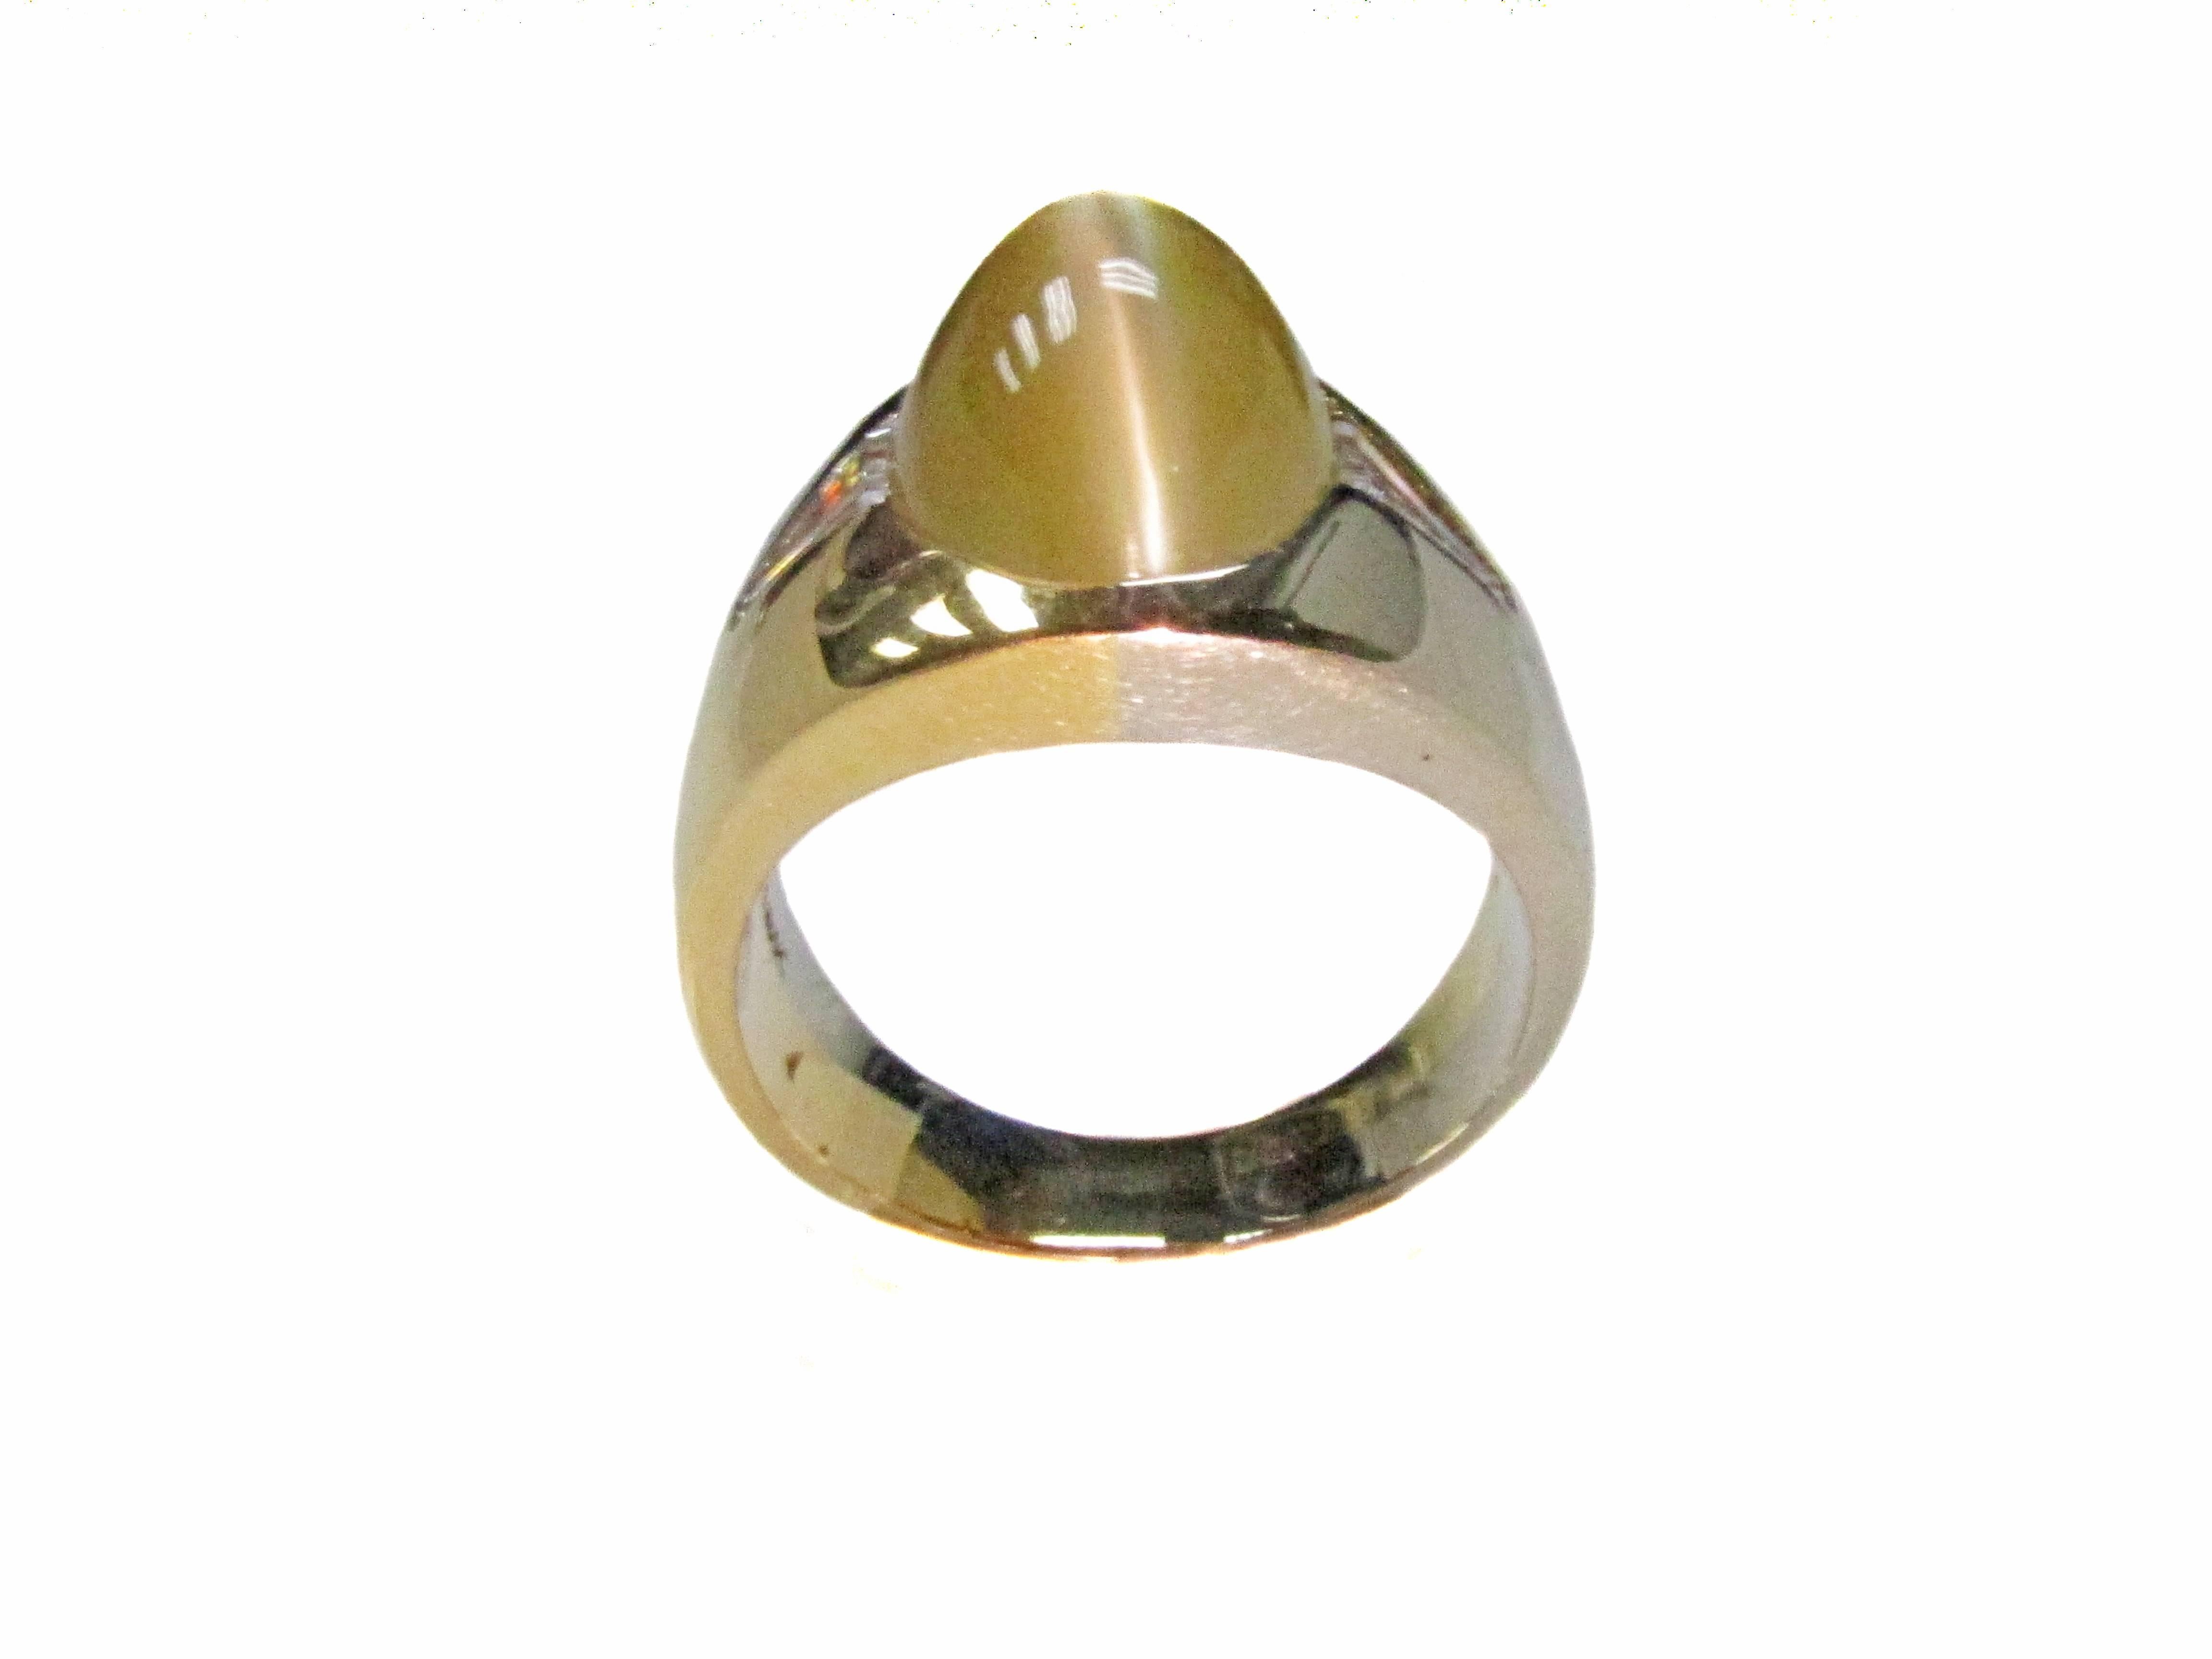 Stunning 2 color 18 karat gold gypsy ring with a center Chrysoberyl Cat's-Eye weighing approximately 8 carats. This gemstone displays an incredibly sharp eye moving across the top of the cabochon with every movement of the hand. The Cat's-Eye